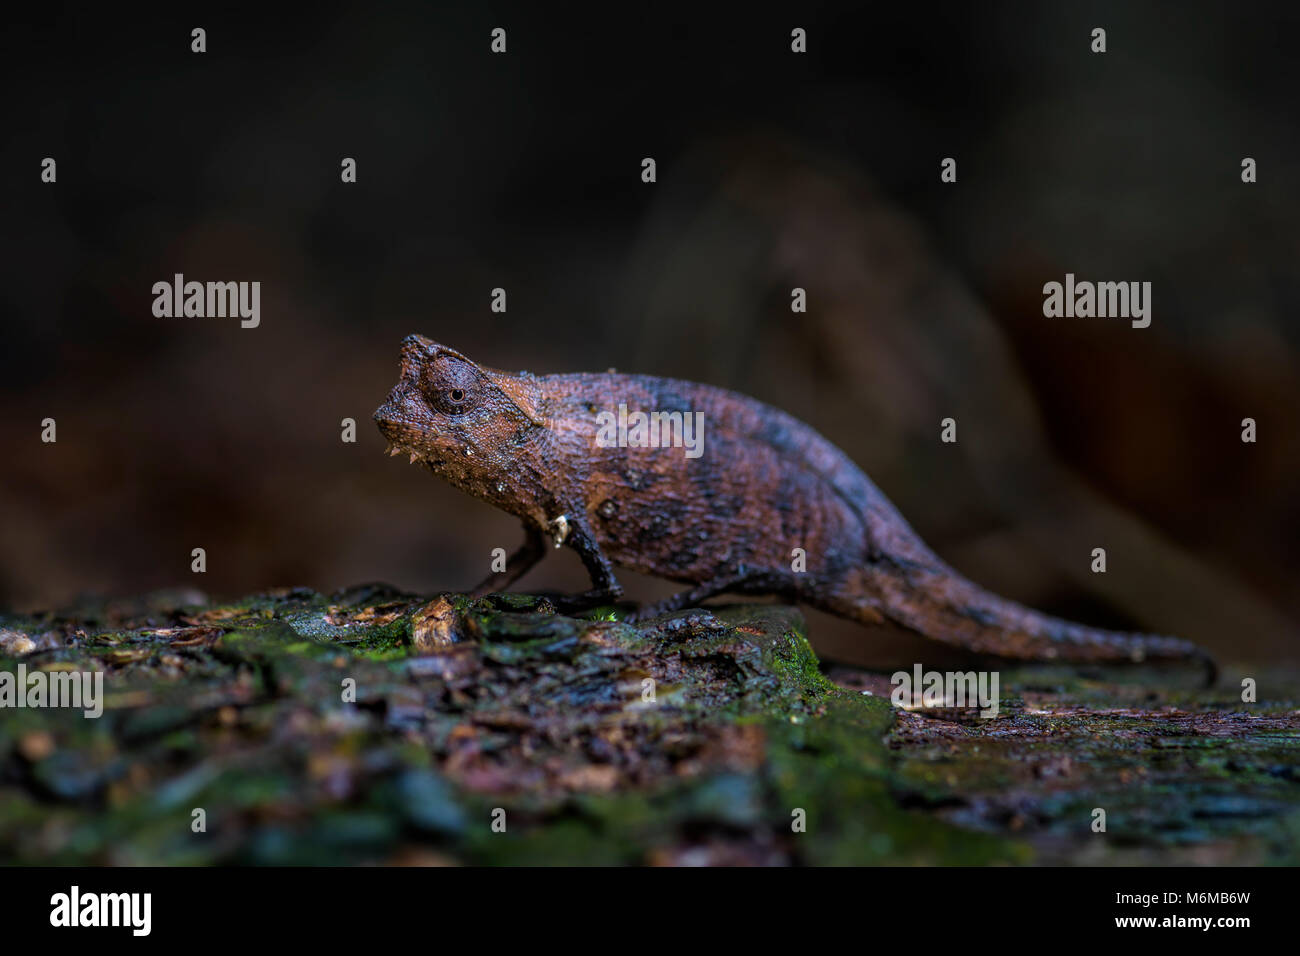 Brown leaf chameleon - Brookesia superciliaris, small beautiful endemic chameleon from Madagascar tropical forest. Camouflage. Stock Photo